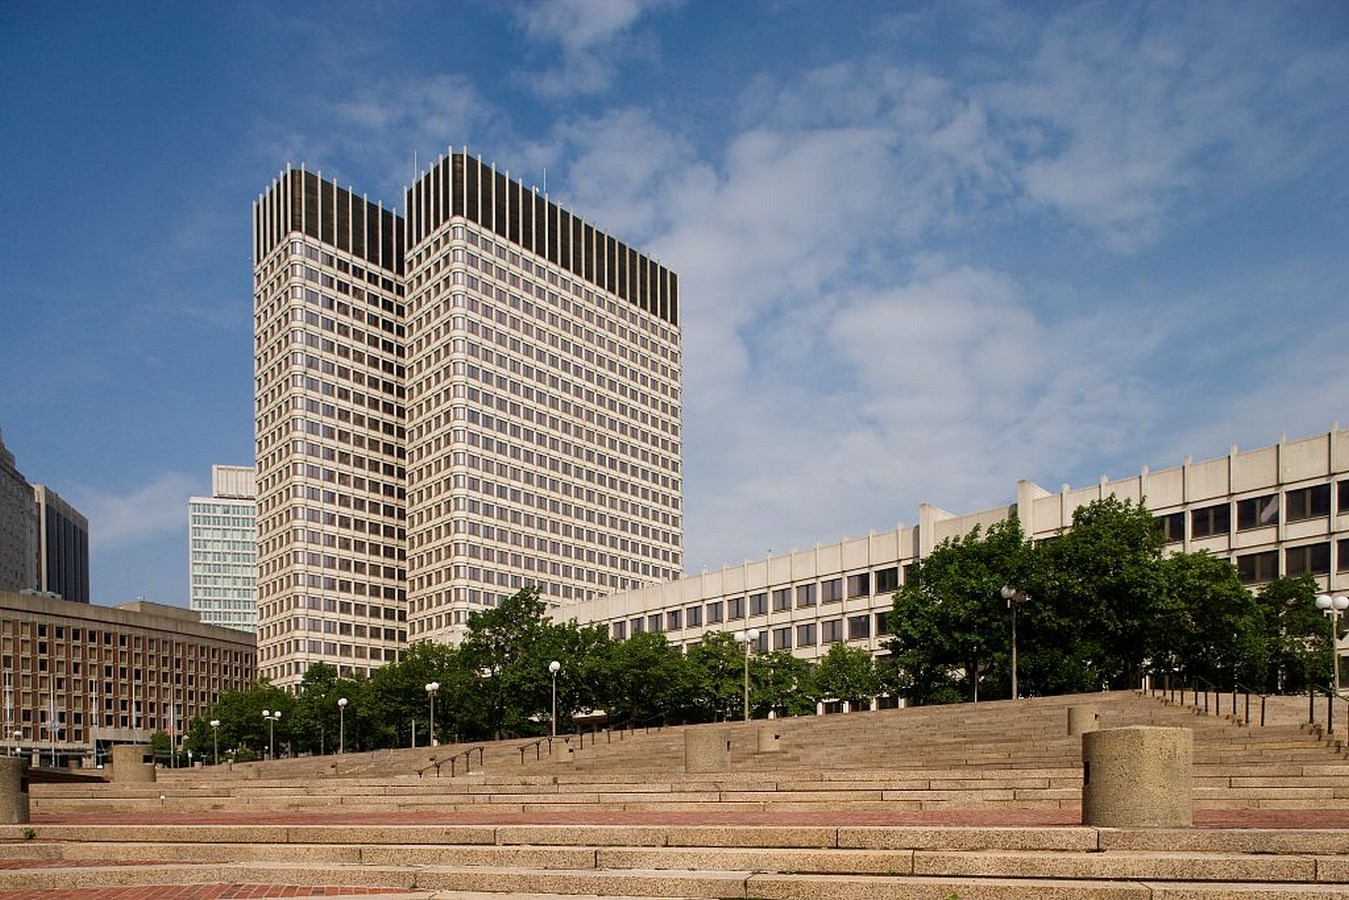 20 Projects that made Walter Gropius the pioneer of Modern Architecture - John Fitzgerald Kennedy Federal Building, USA